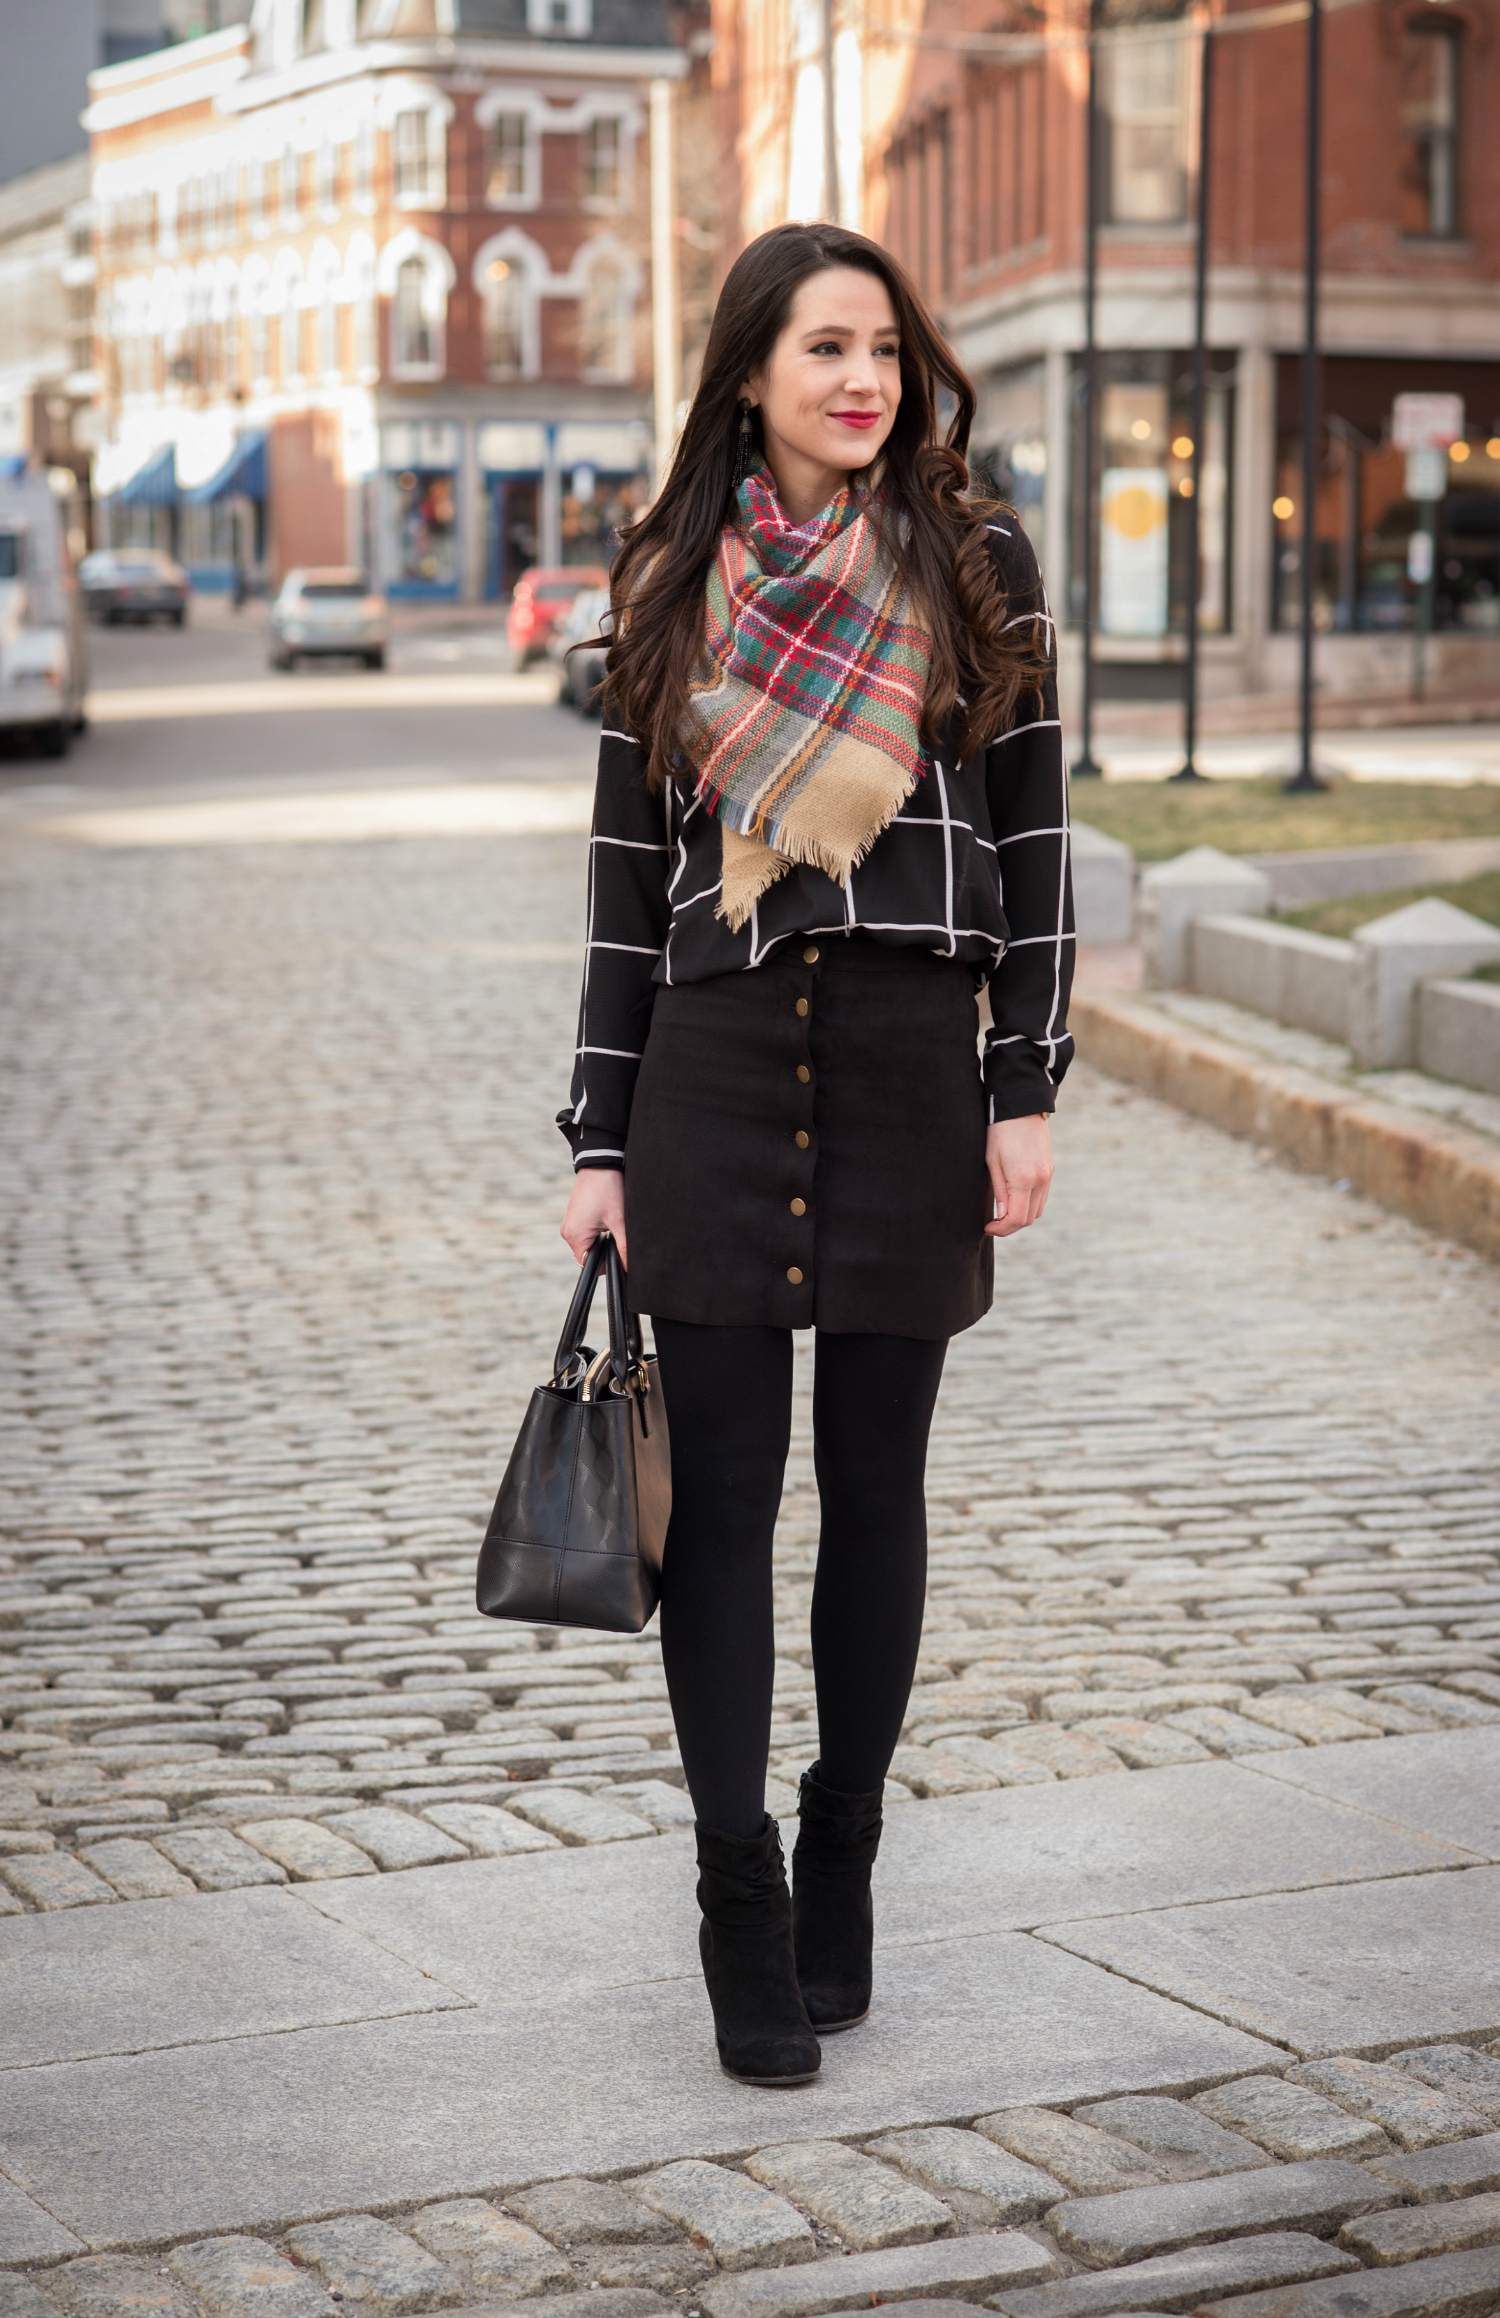 Chic all black winter outfit with a pop of color in the scarf